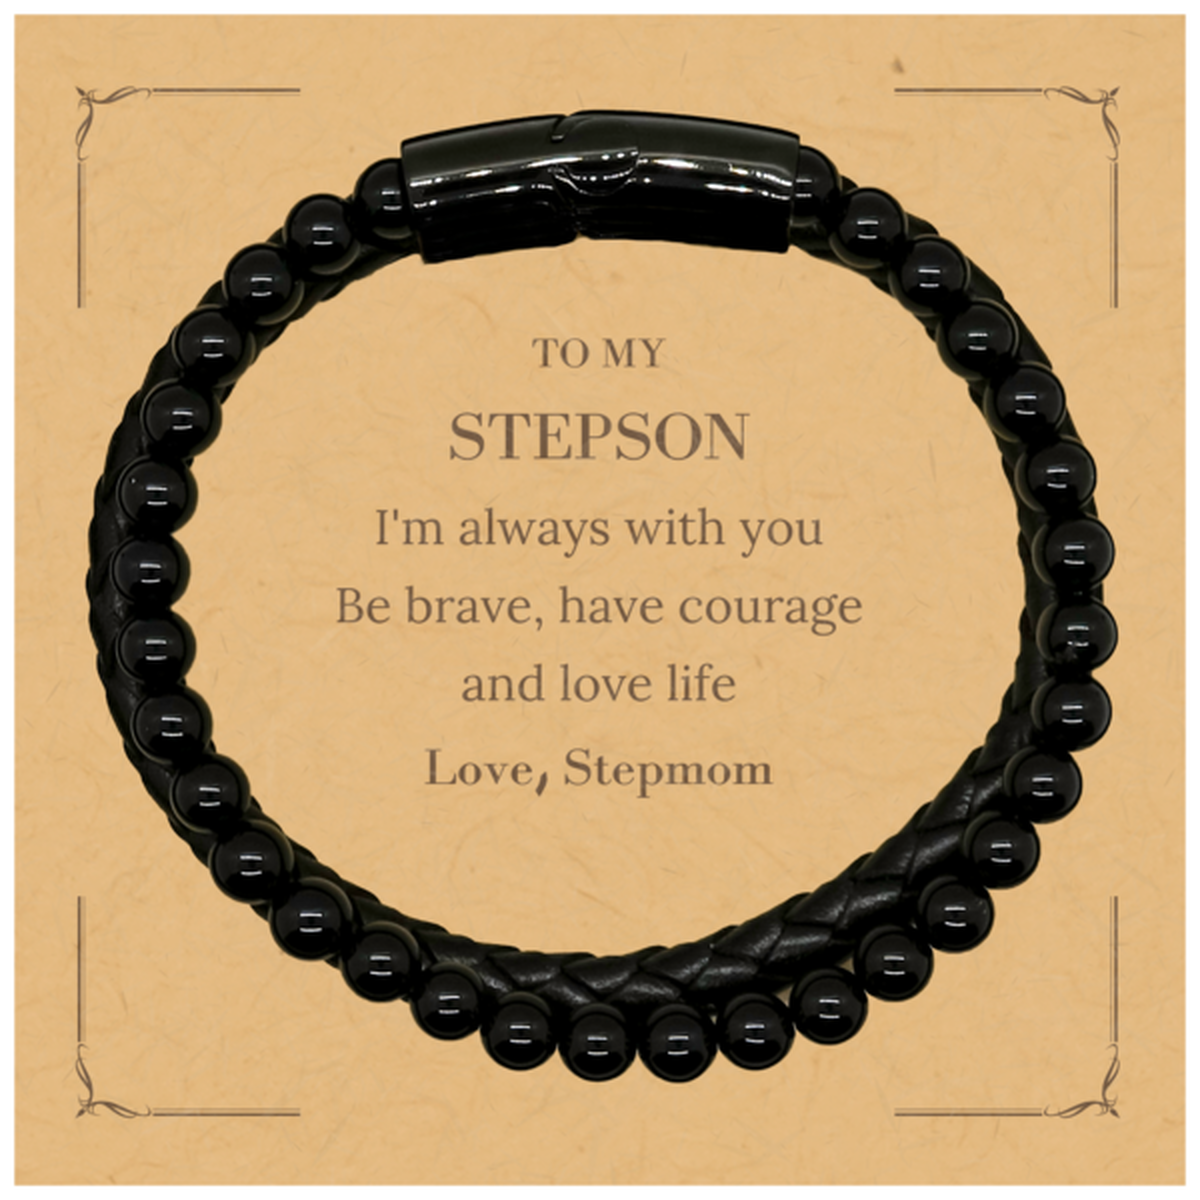 To My Stepson Gifts from Stepmom, Unique Stone Leather Bracelets Inspirational Christmas Birthday Graduation Gifts for Stepson I'm always with you. Be brave, have courage and love life. Love, Stepmom